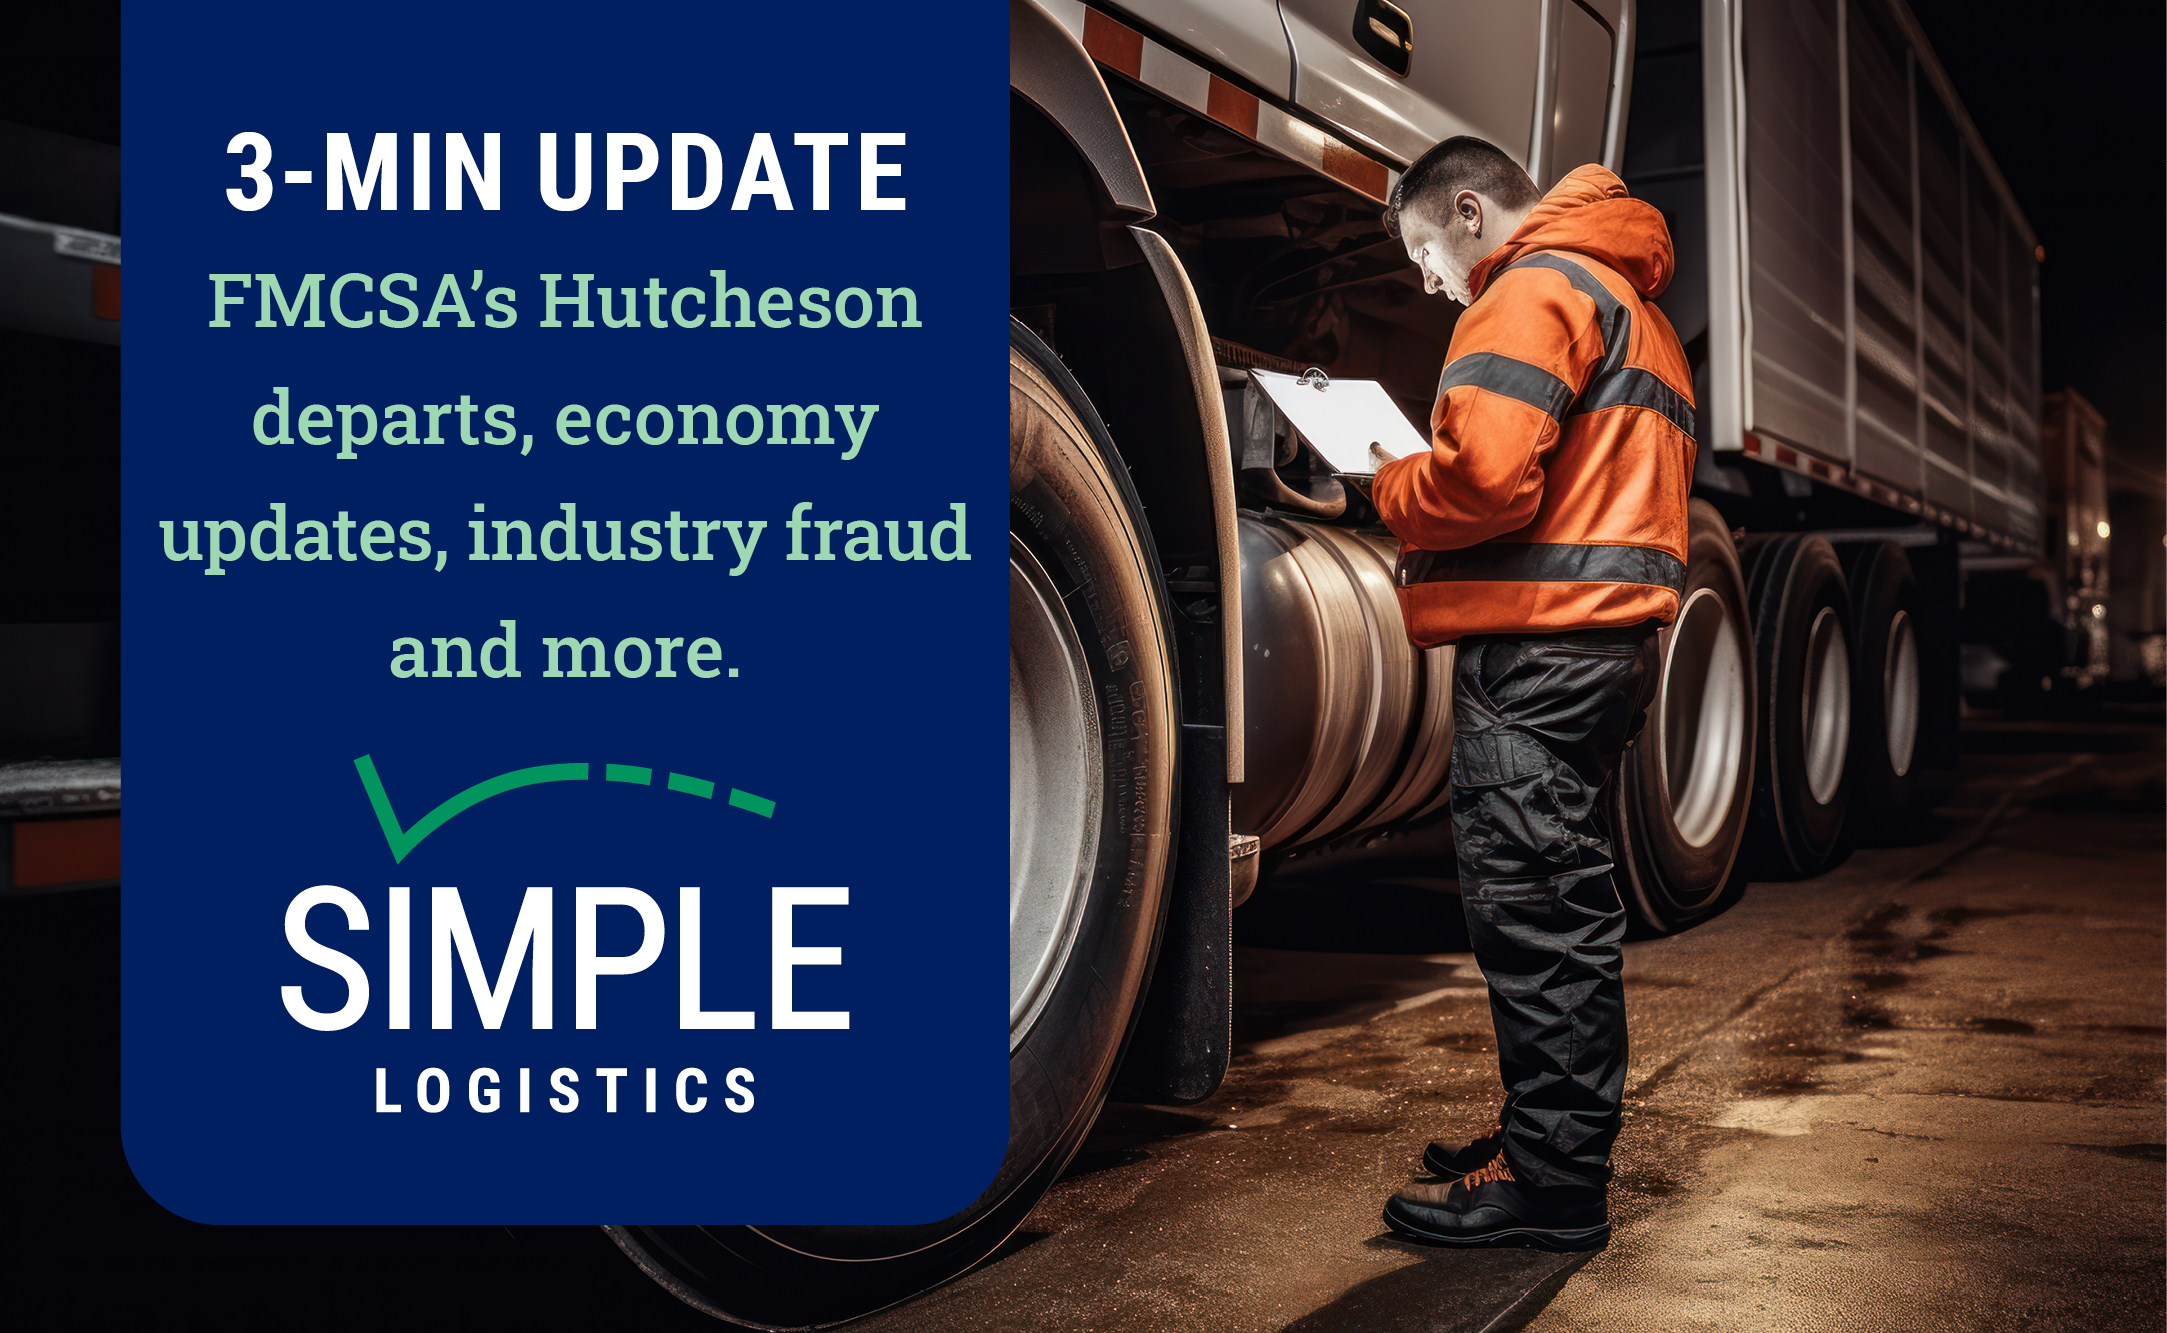 Truck Serviceman Pretrip technical inspection. Text reads: 3-Minute Update: FMCAS Hutcheson departs, economy updates, industry fraud, and more.